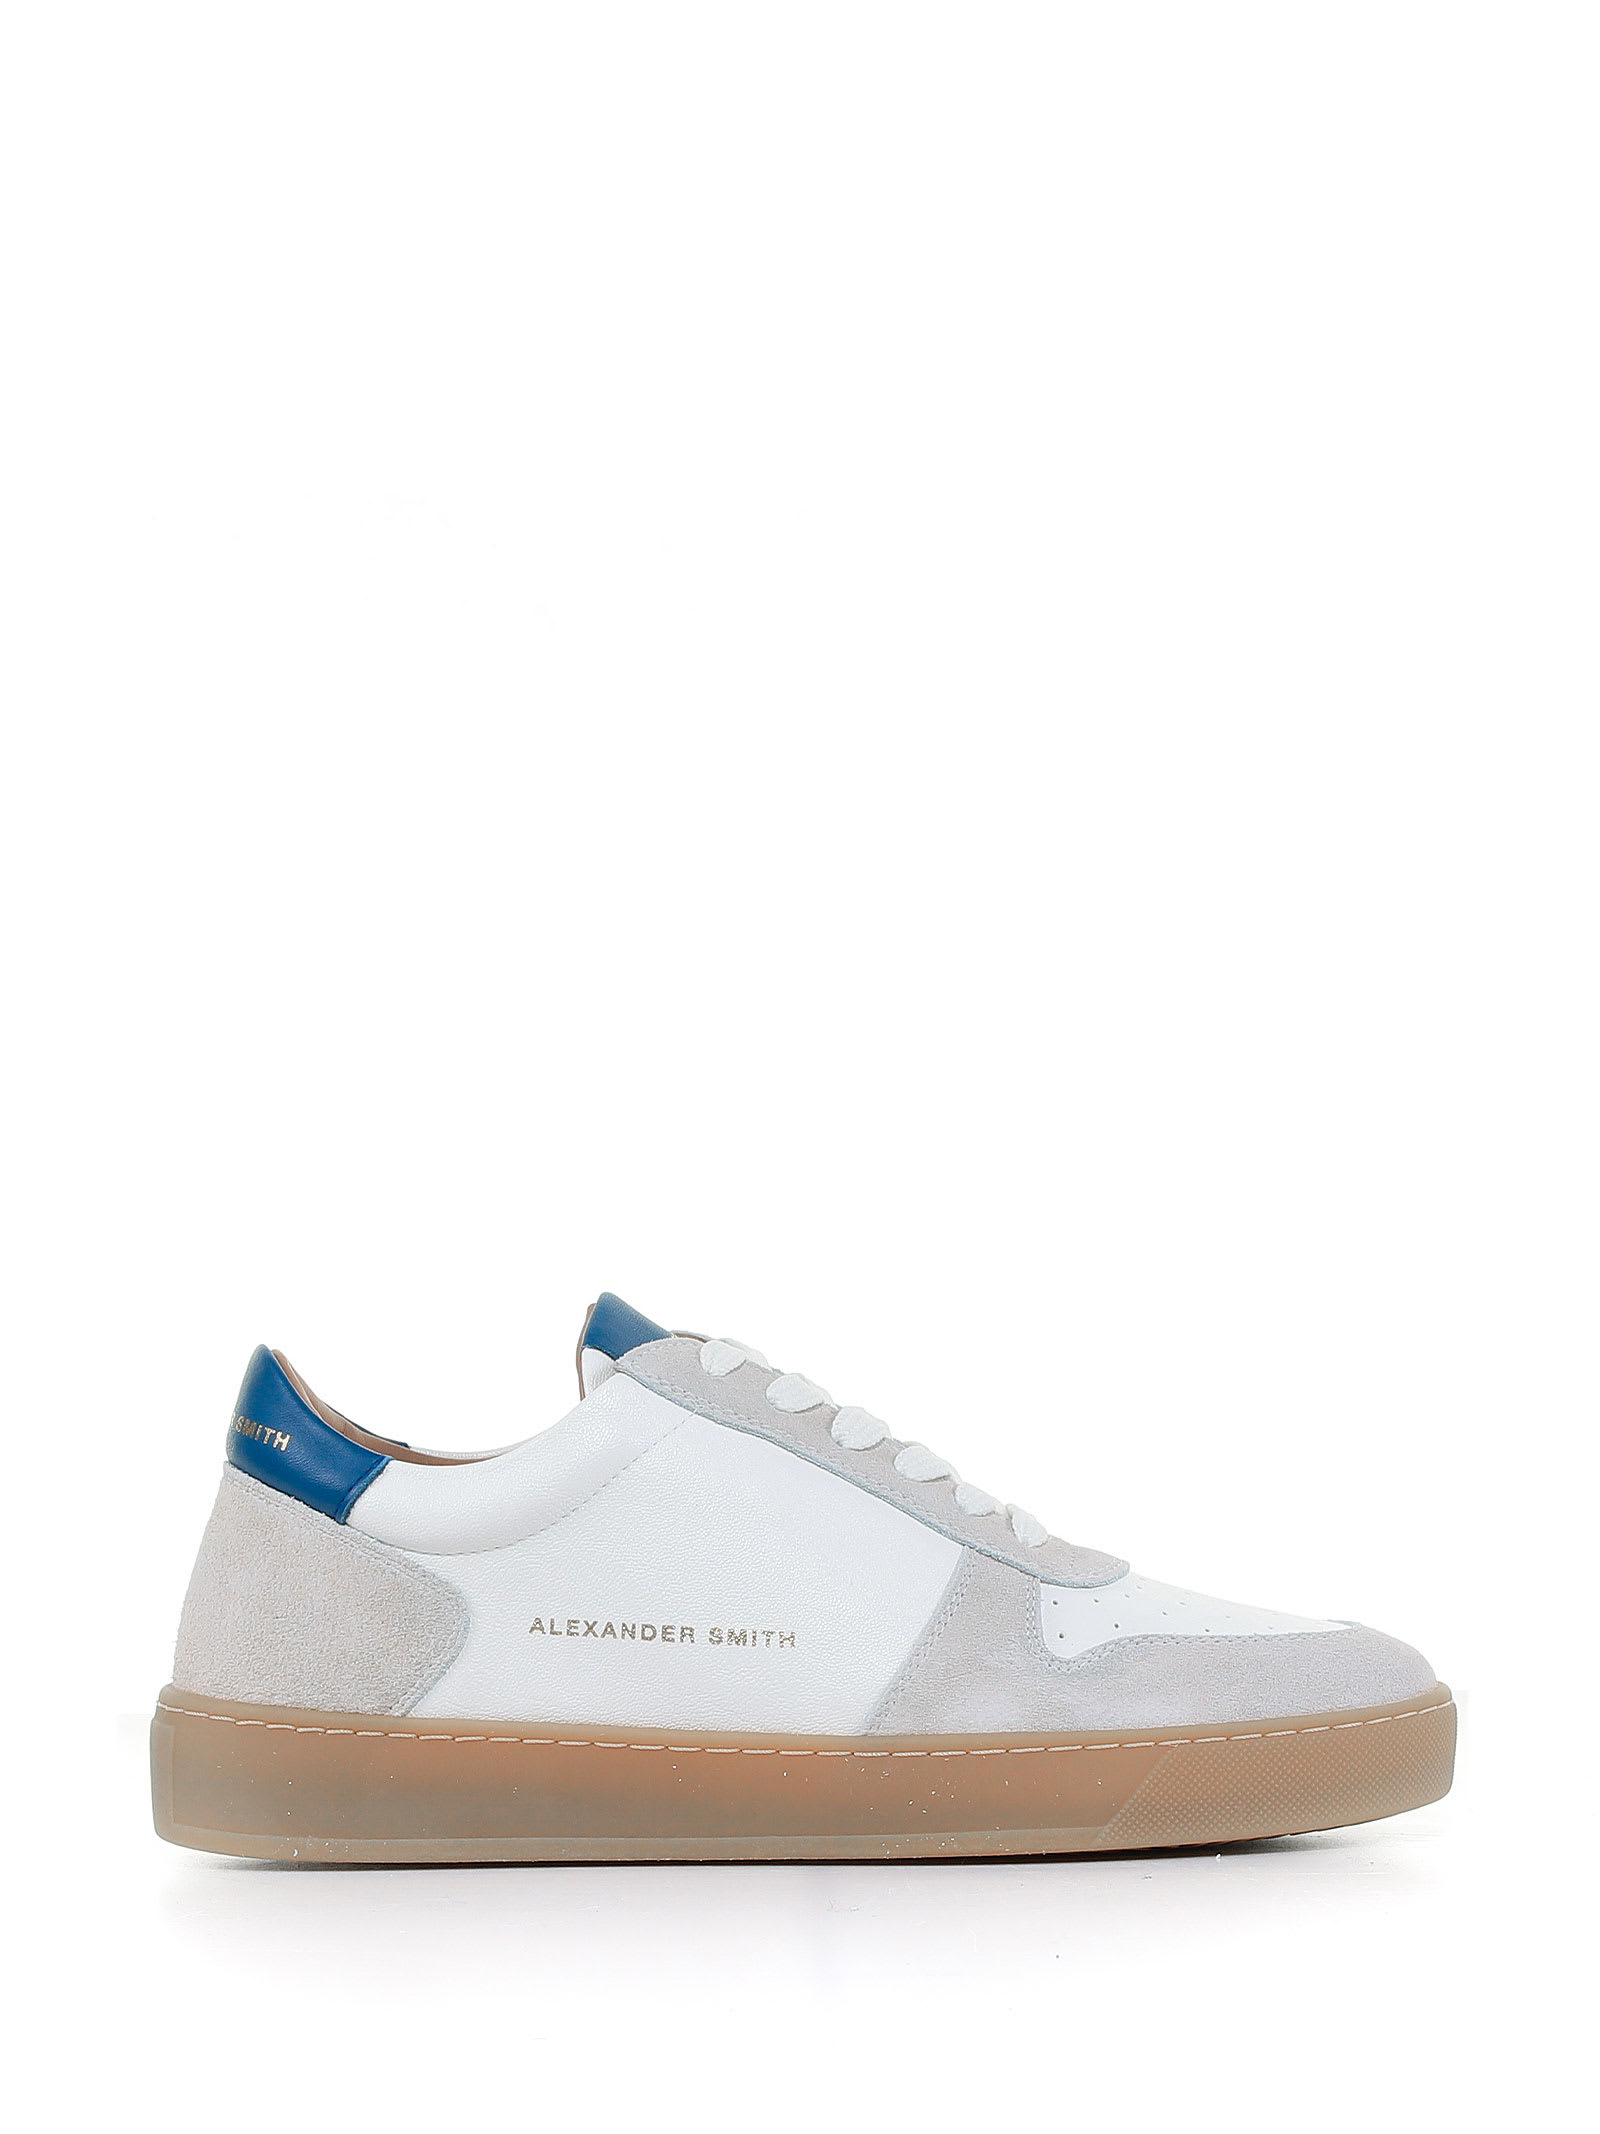 Alexander Smith London Cambridge Sneaker In Leather And Suede